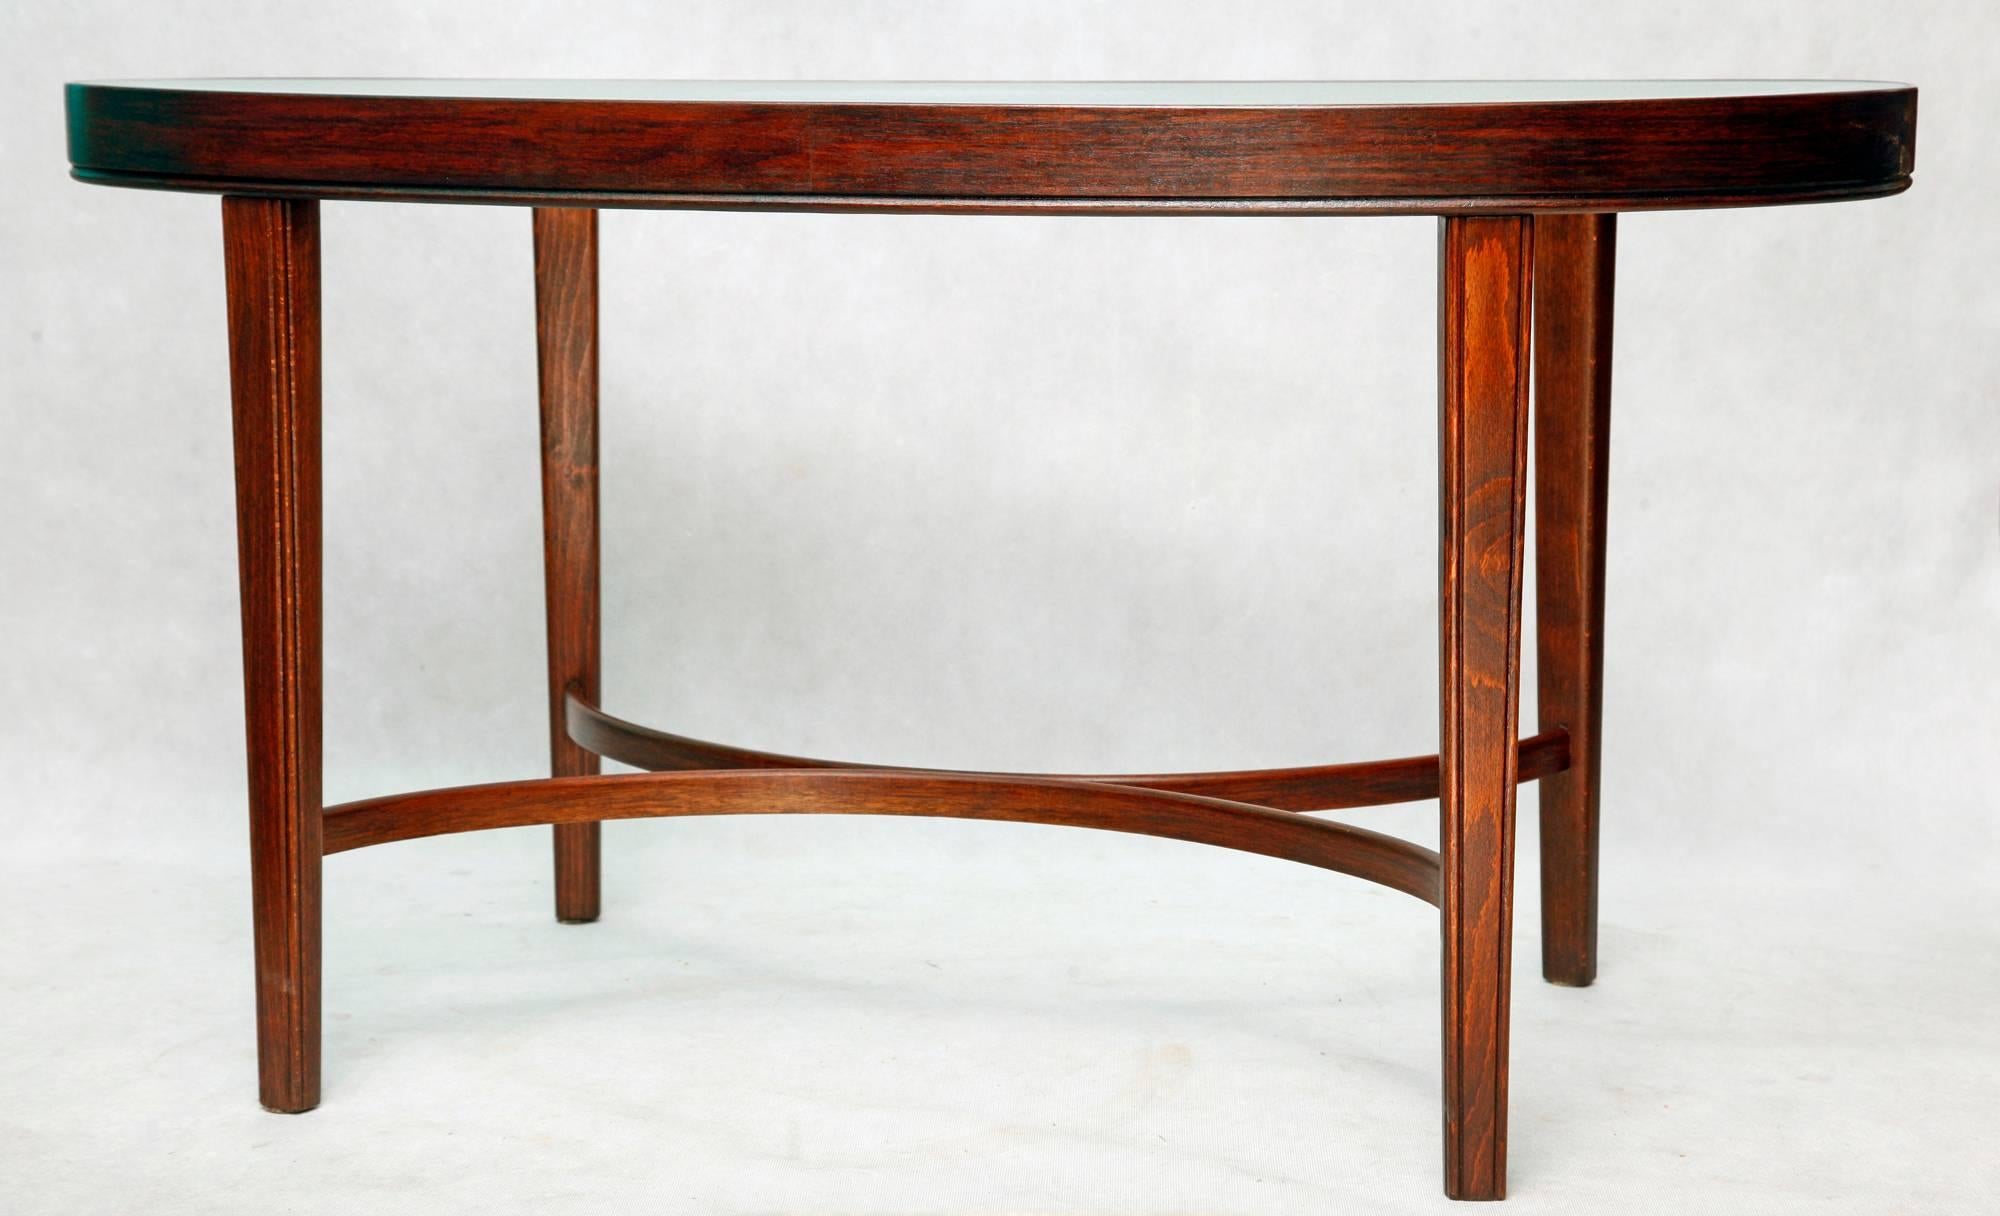 Mid-20th Century Beech Coffee Table with a Glass Top, Denmark, 1940s For Sale